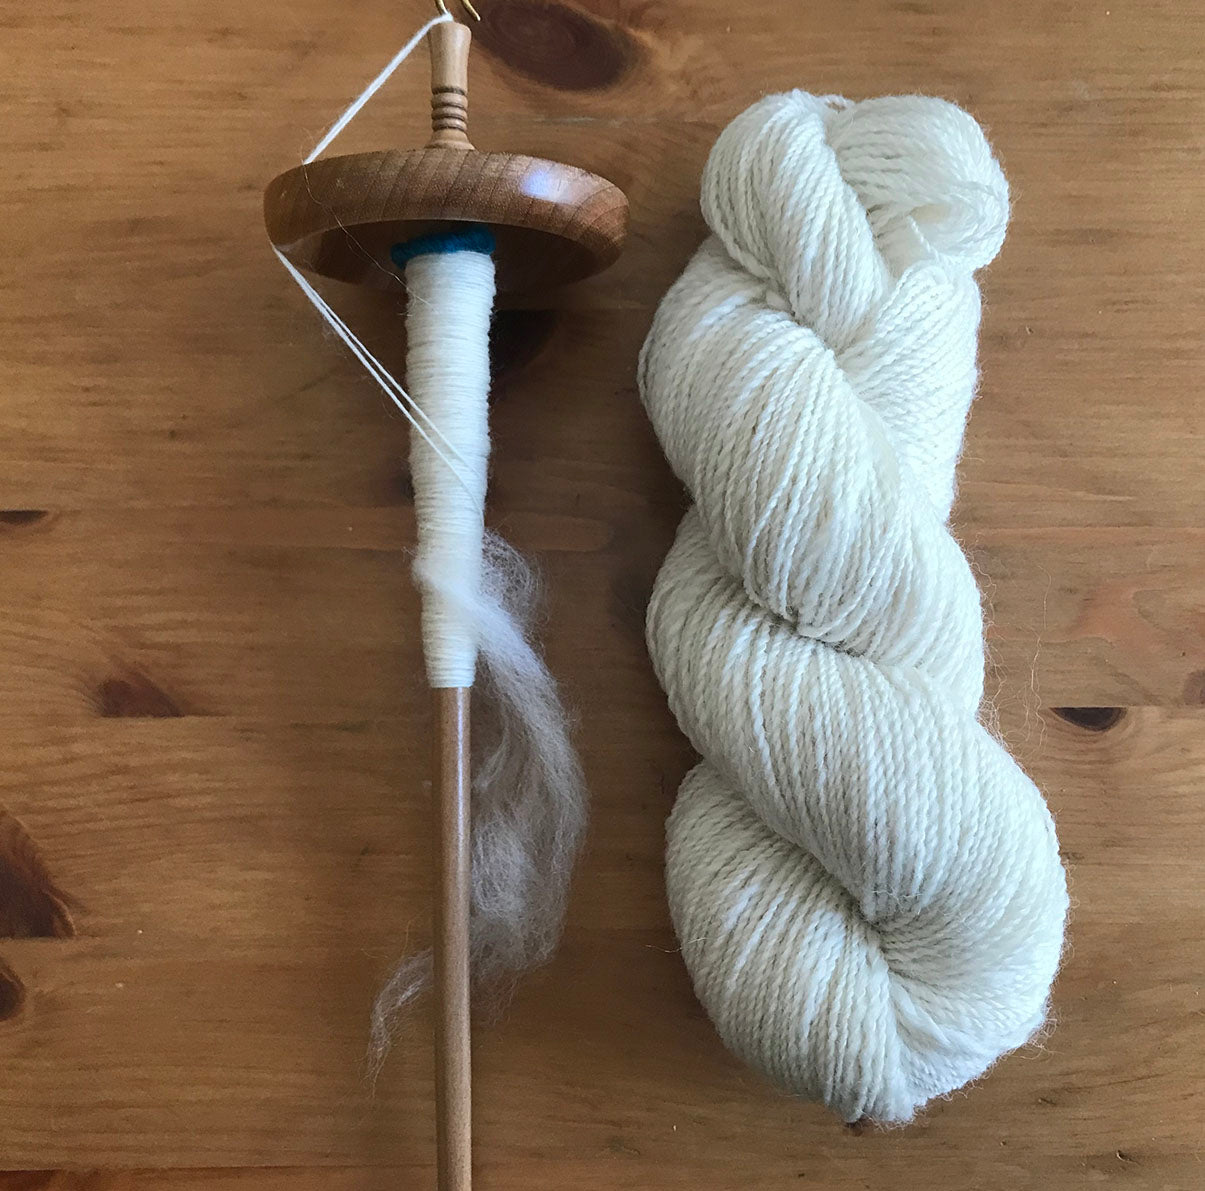 Learn To Spin (wheel & drop spindle)